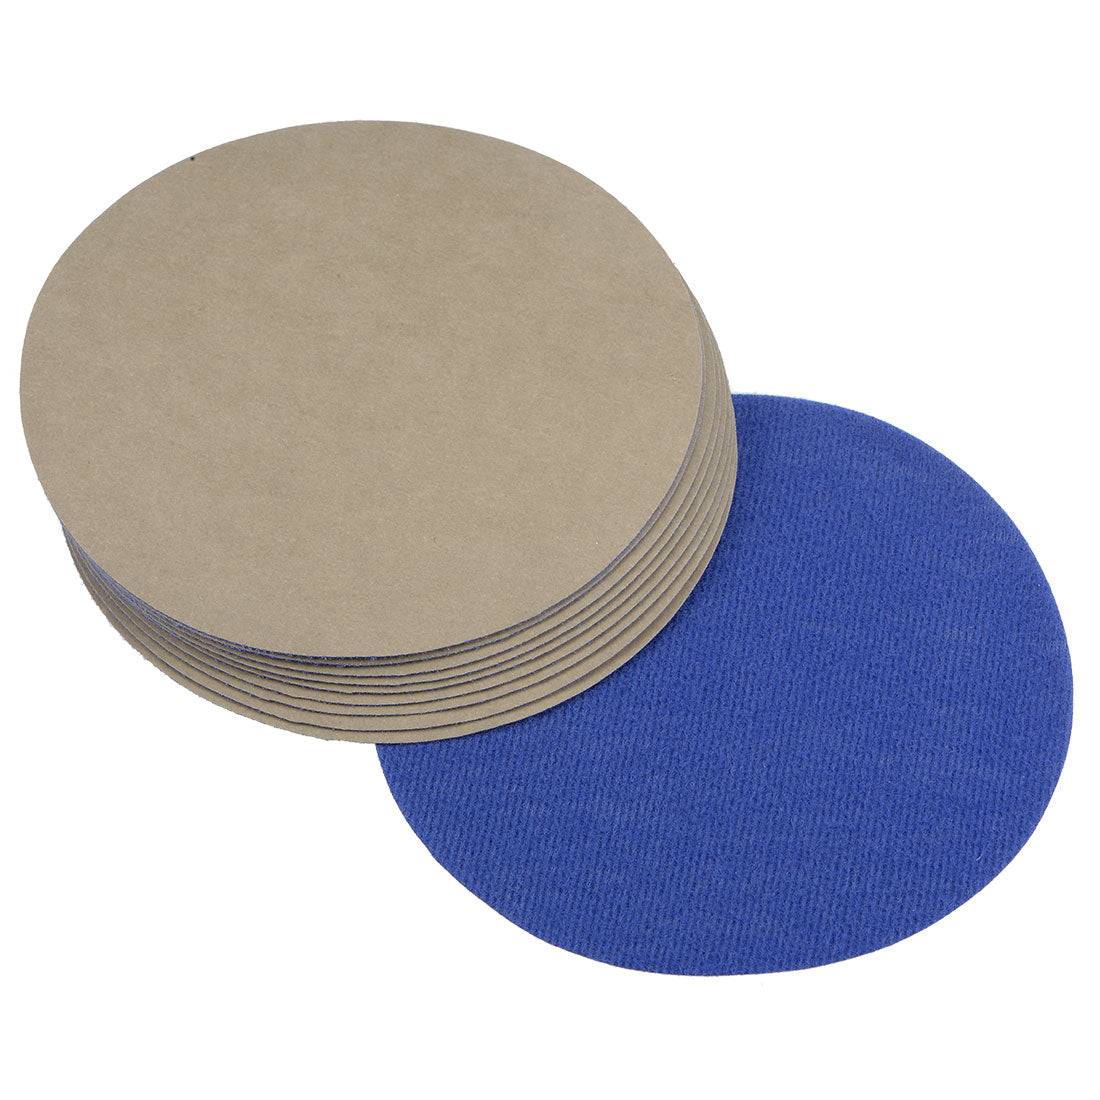 Uxcell Uxcell 5 inch Wet Dry Disc 7000 Grit Hook and Loop Sanding Disc Silicon Carbide 5pcs